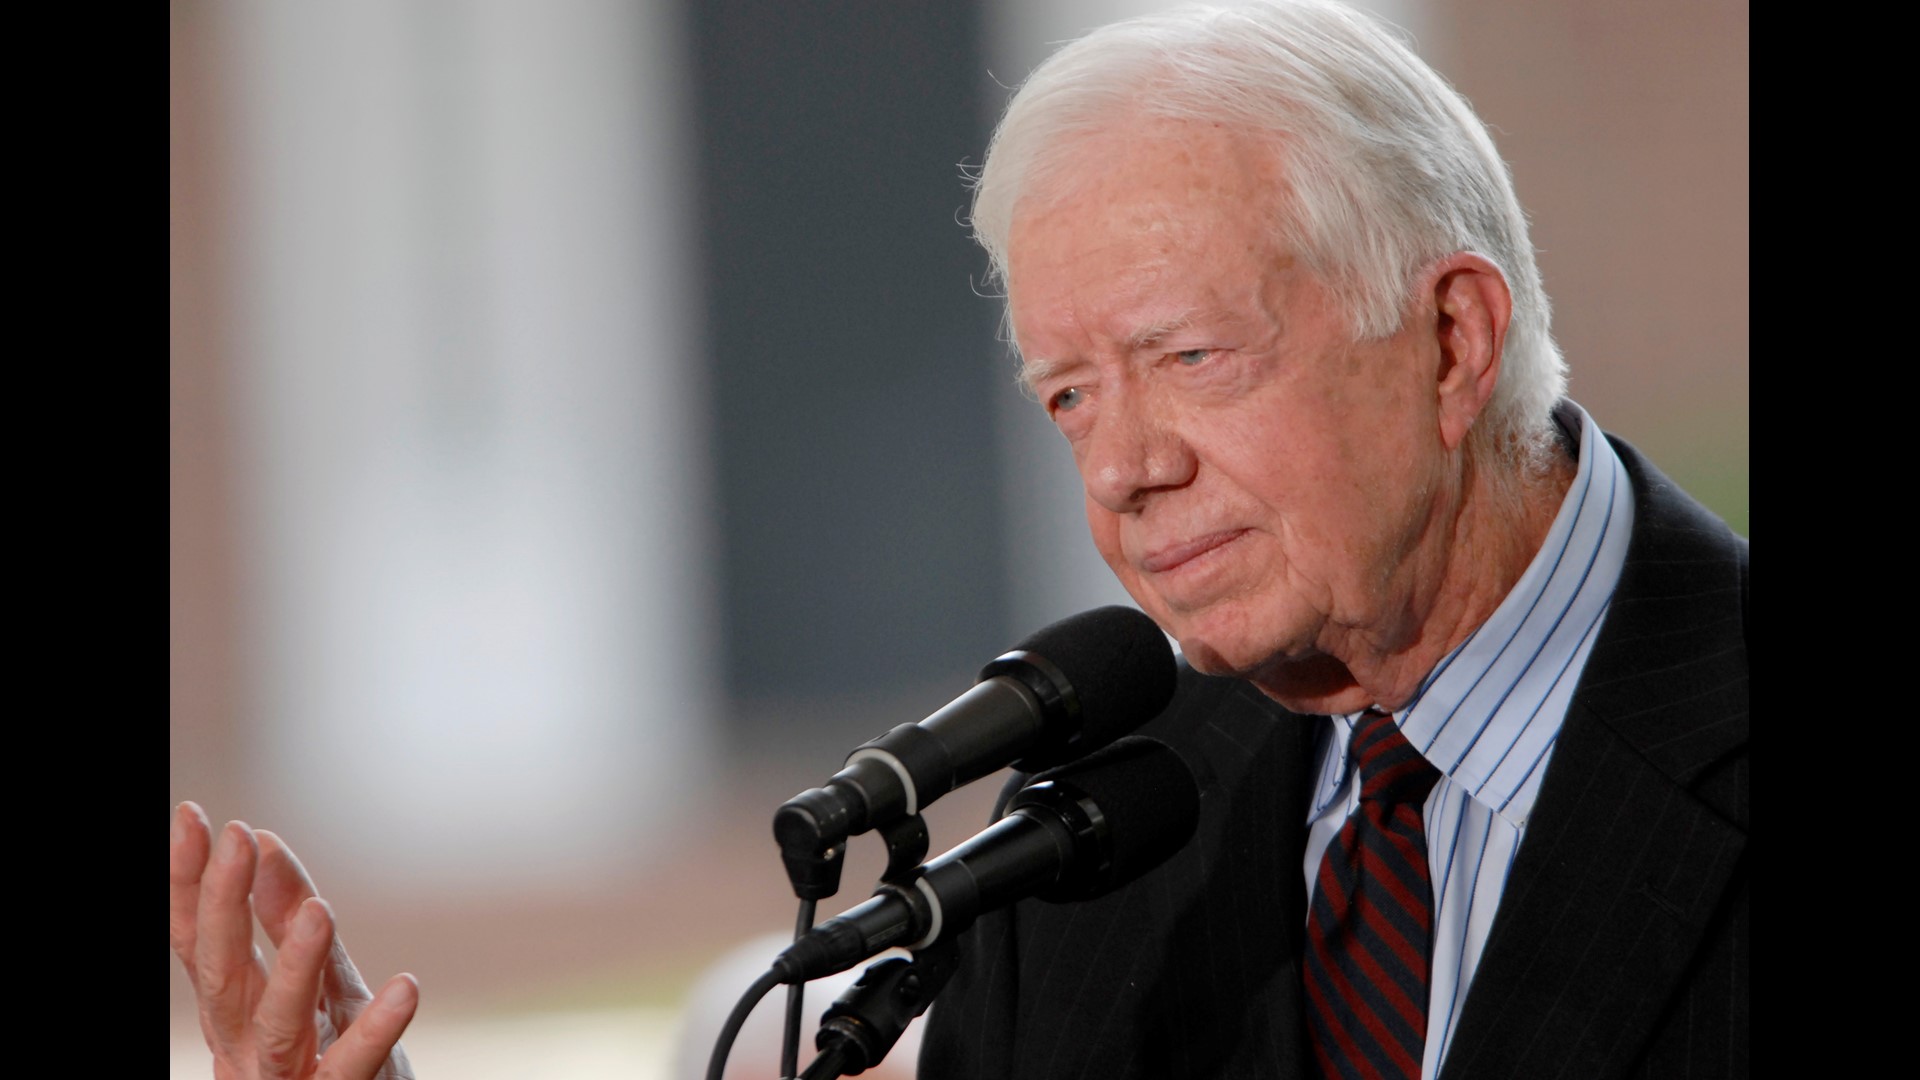 While Jimmy Carter is still in hospice care, he is turning 99 on Oct. 1. Now, the Carter Foundation says you can be part of his birthday by sending him a card.